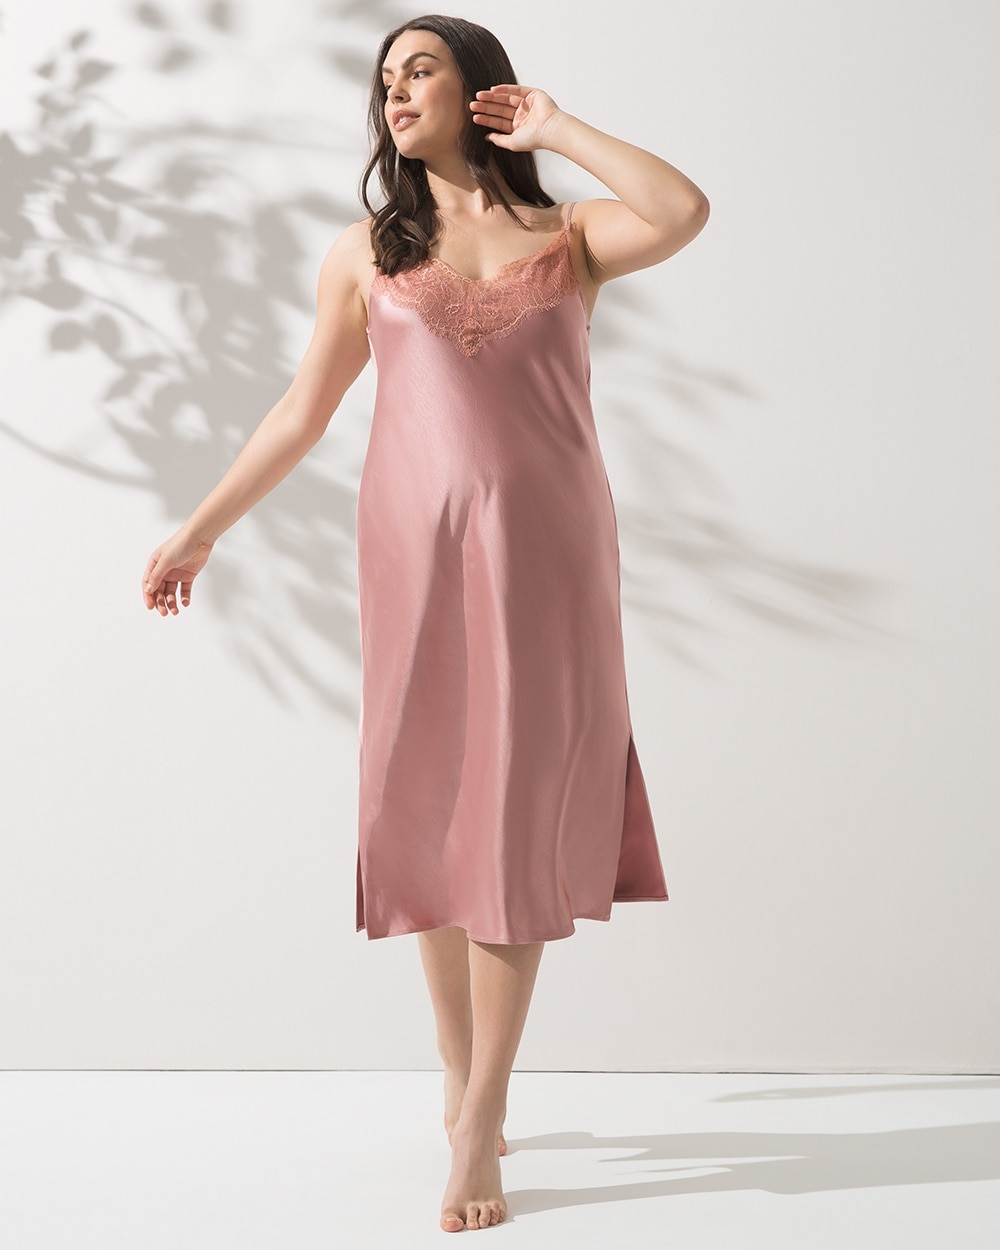 Sensual Satin Chemise with Lace Trim - Soma